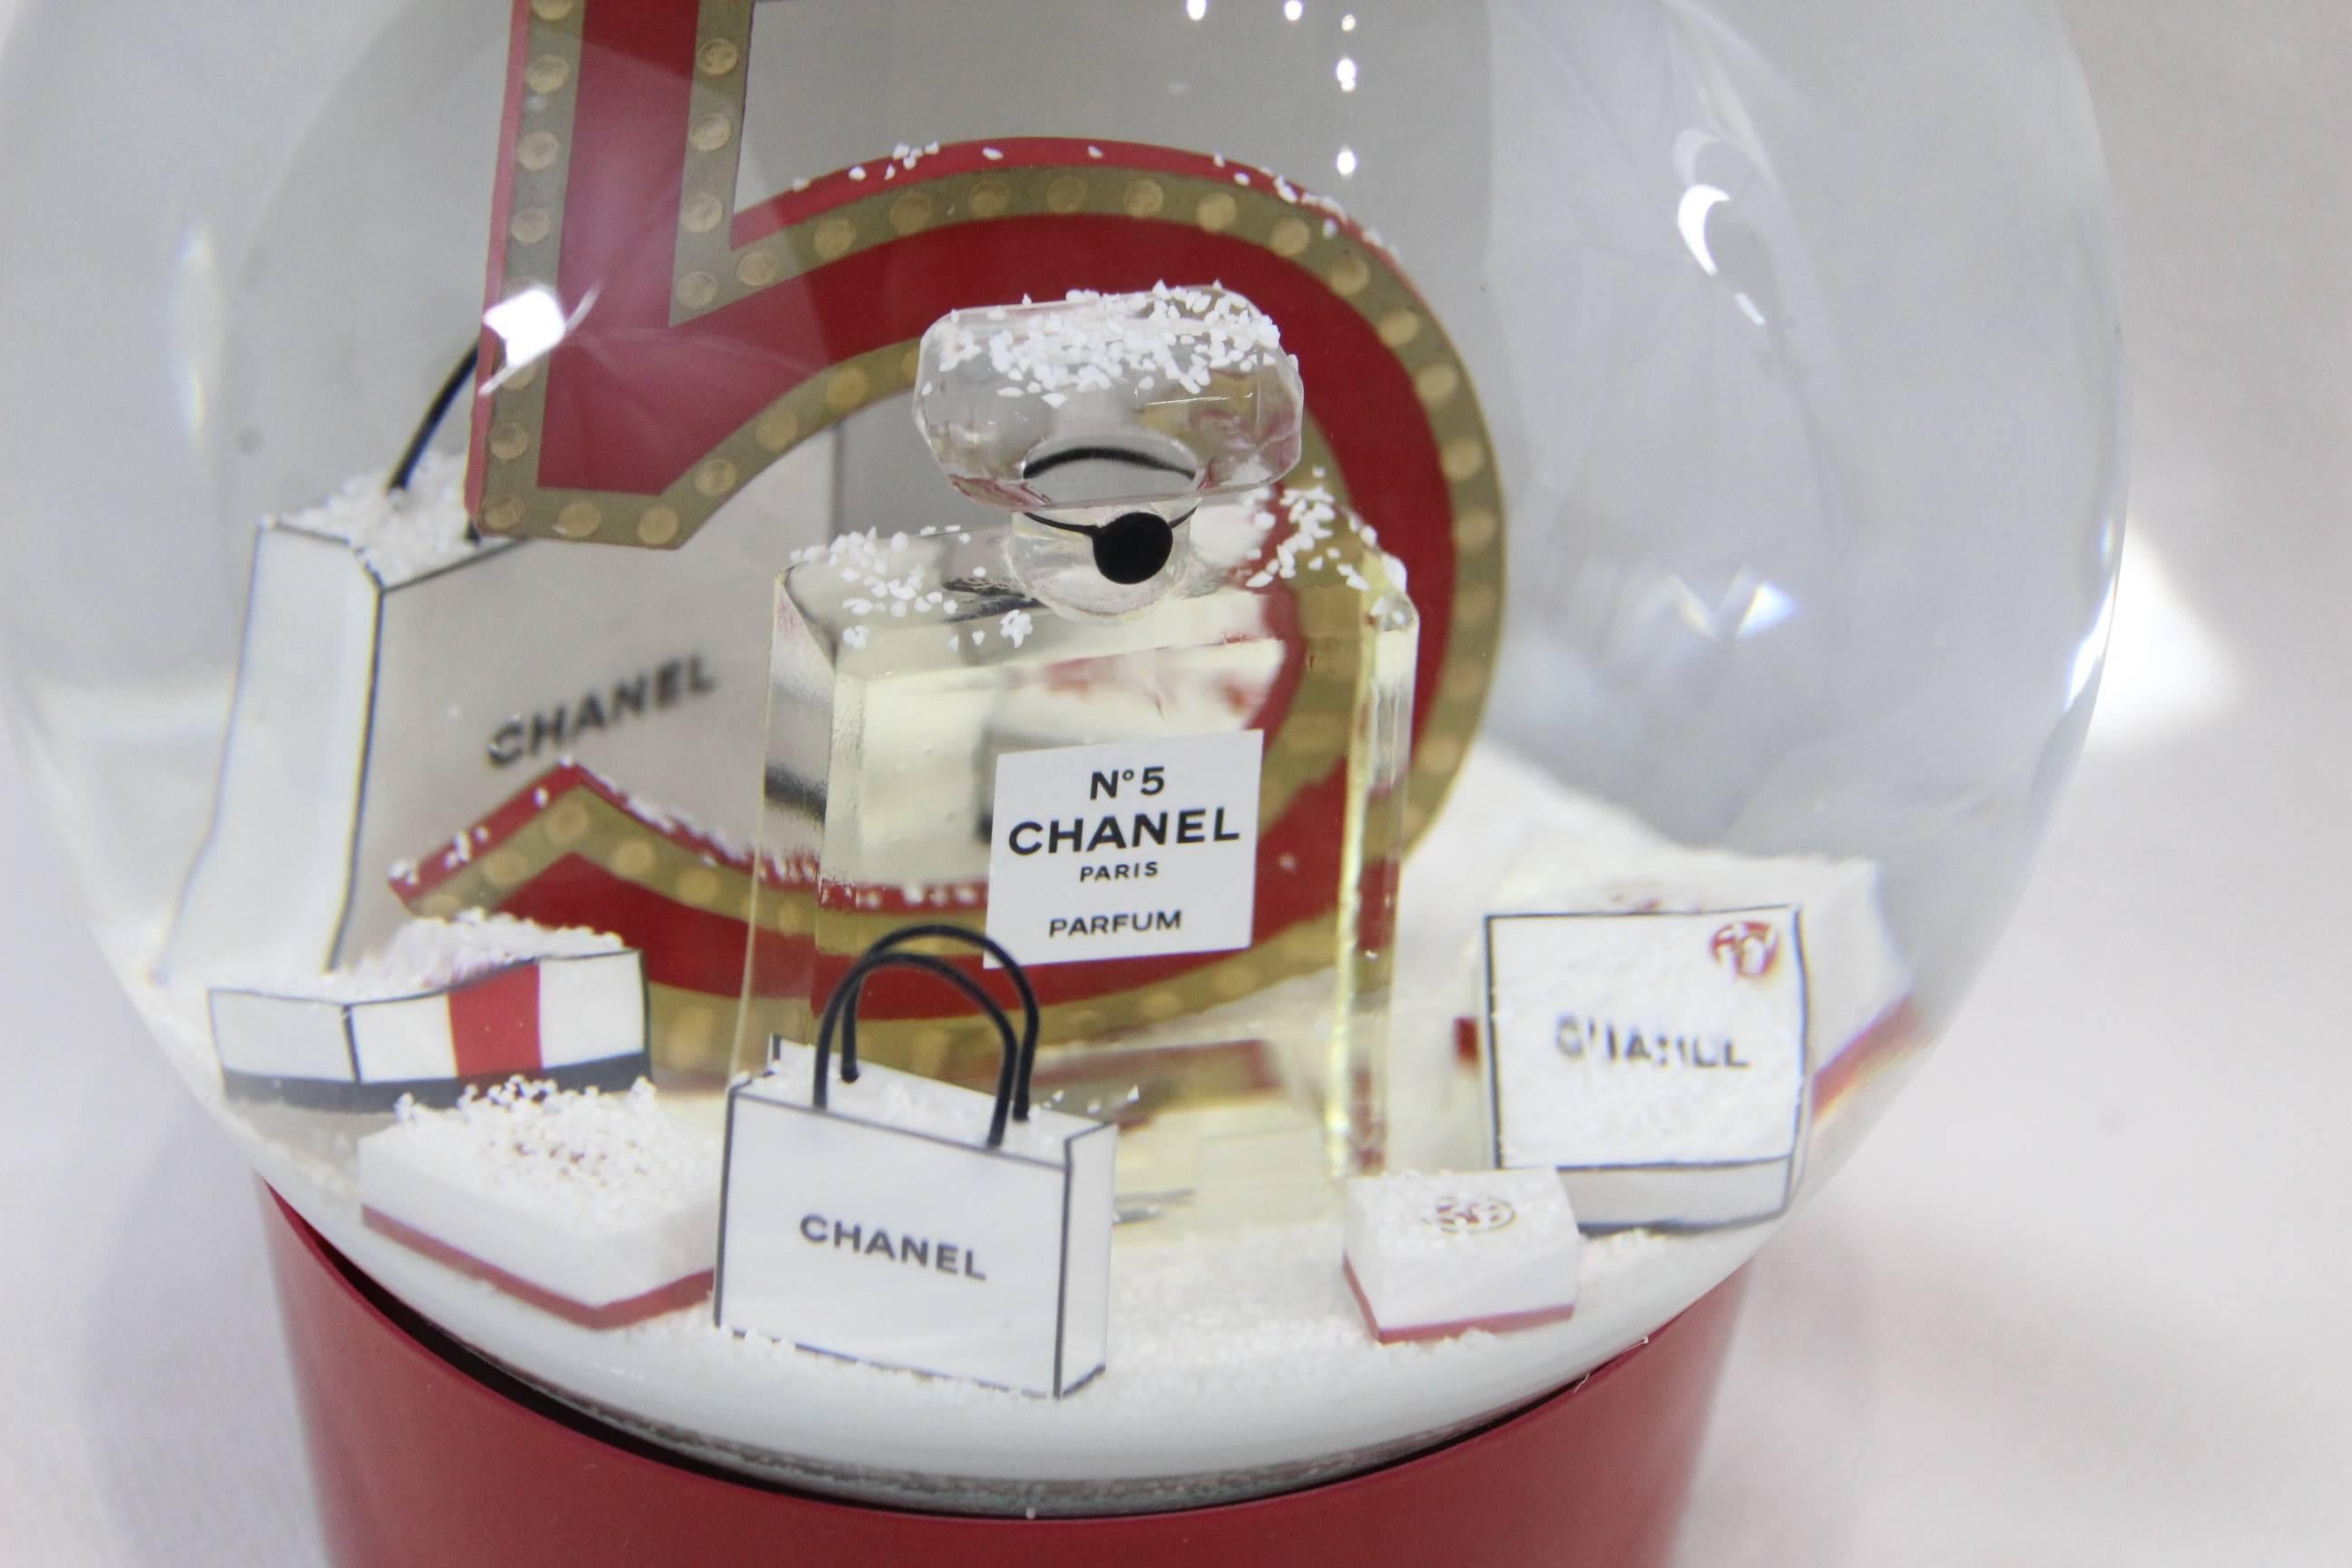 Really nice snowball from Chanel representing Chanel N°5. 
It is an automatic snowball thata is charge with a USB cable ( included)
Coming with box and outter box.